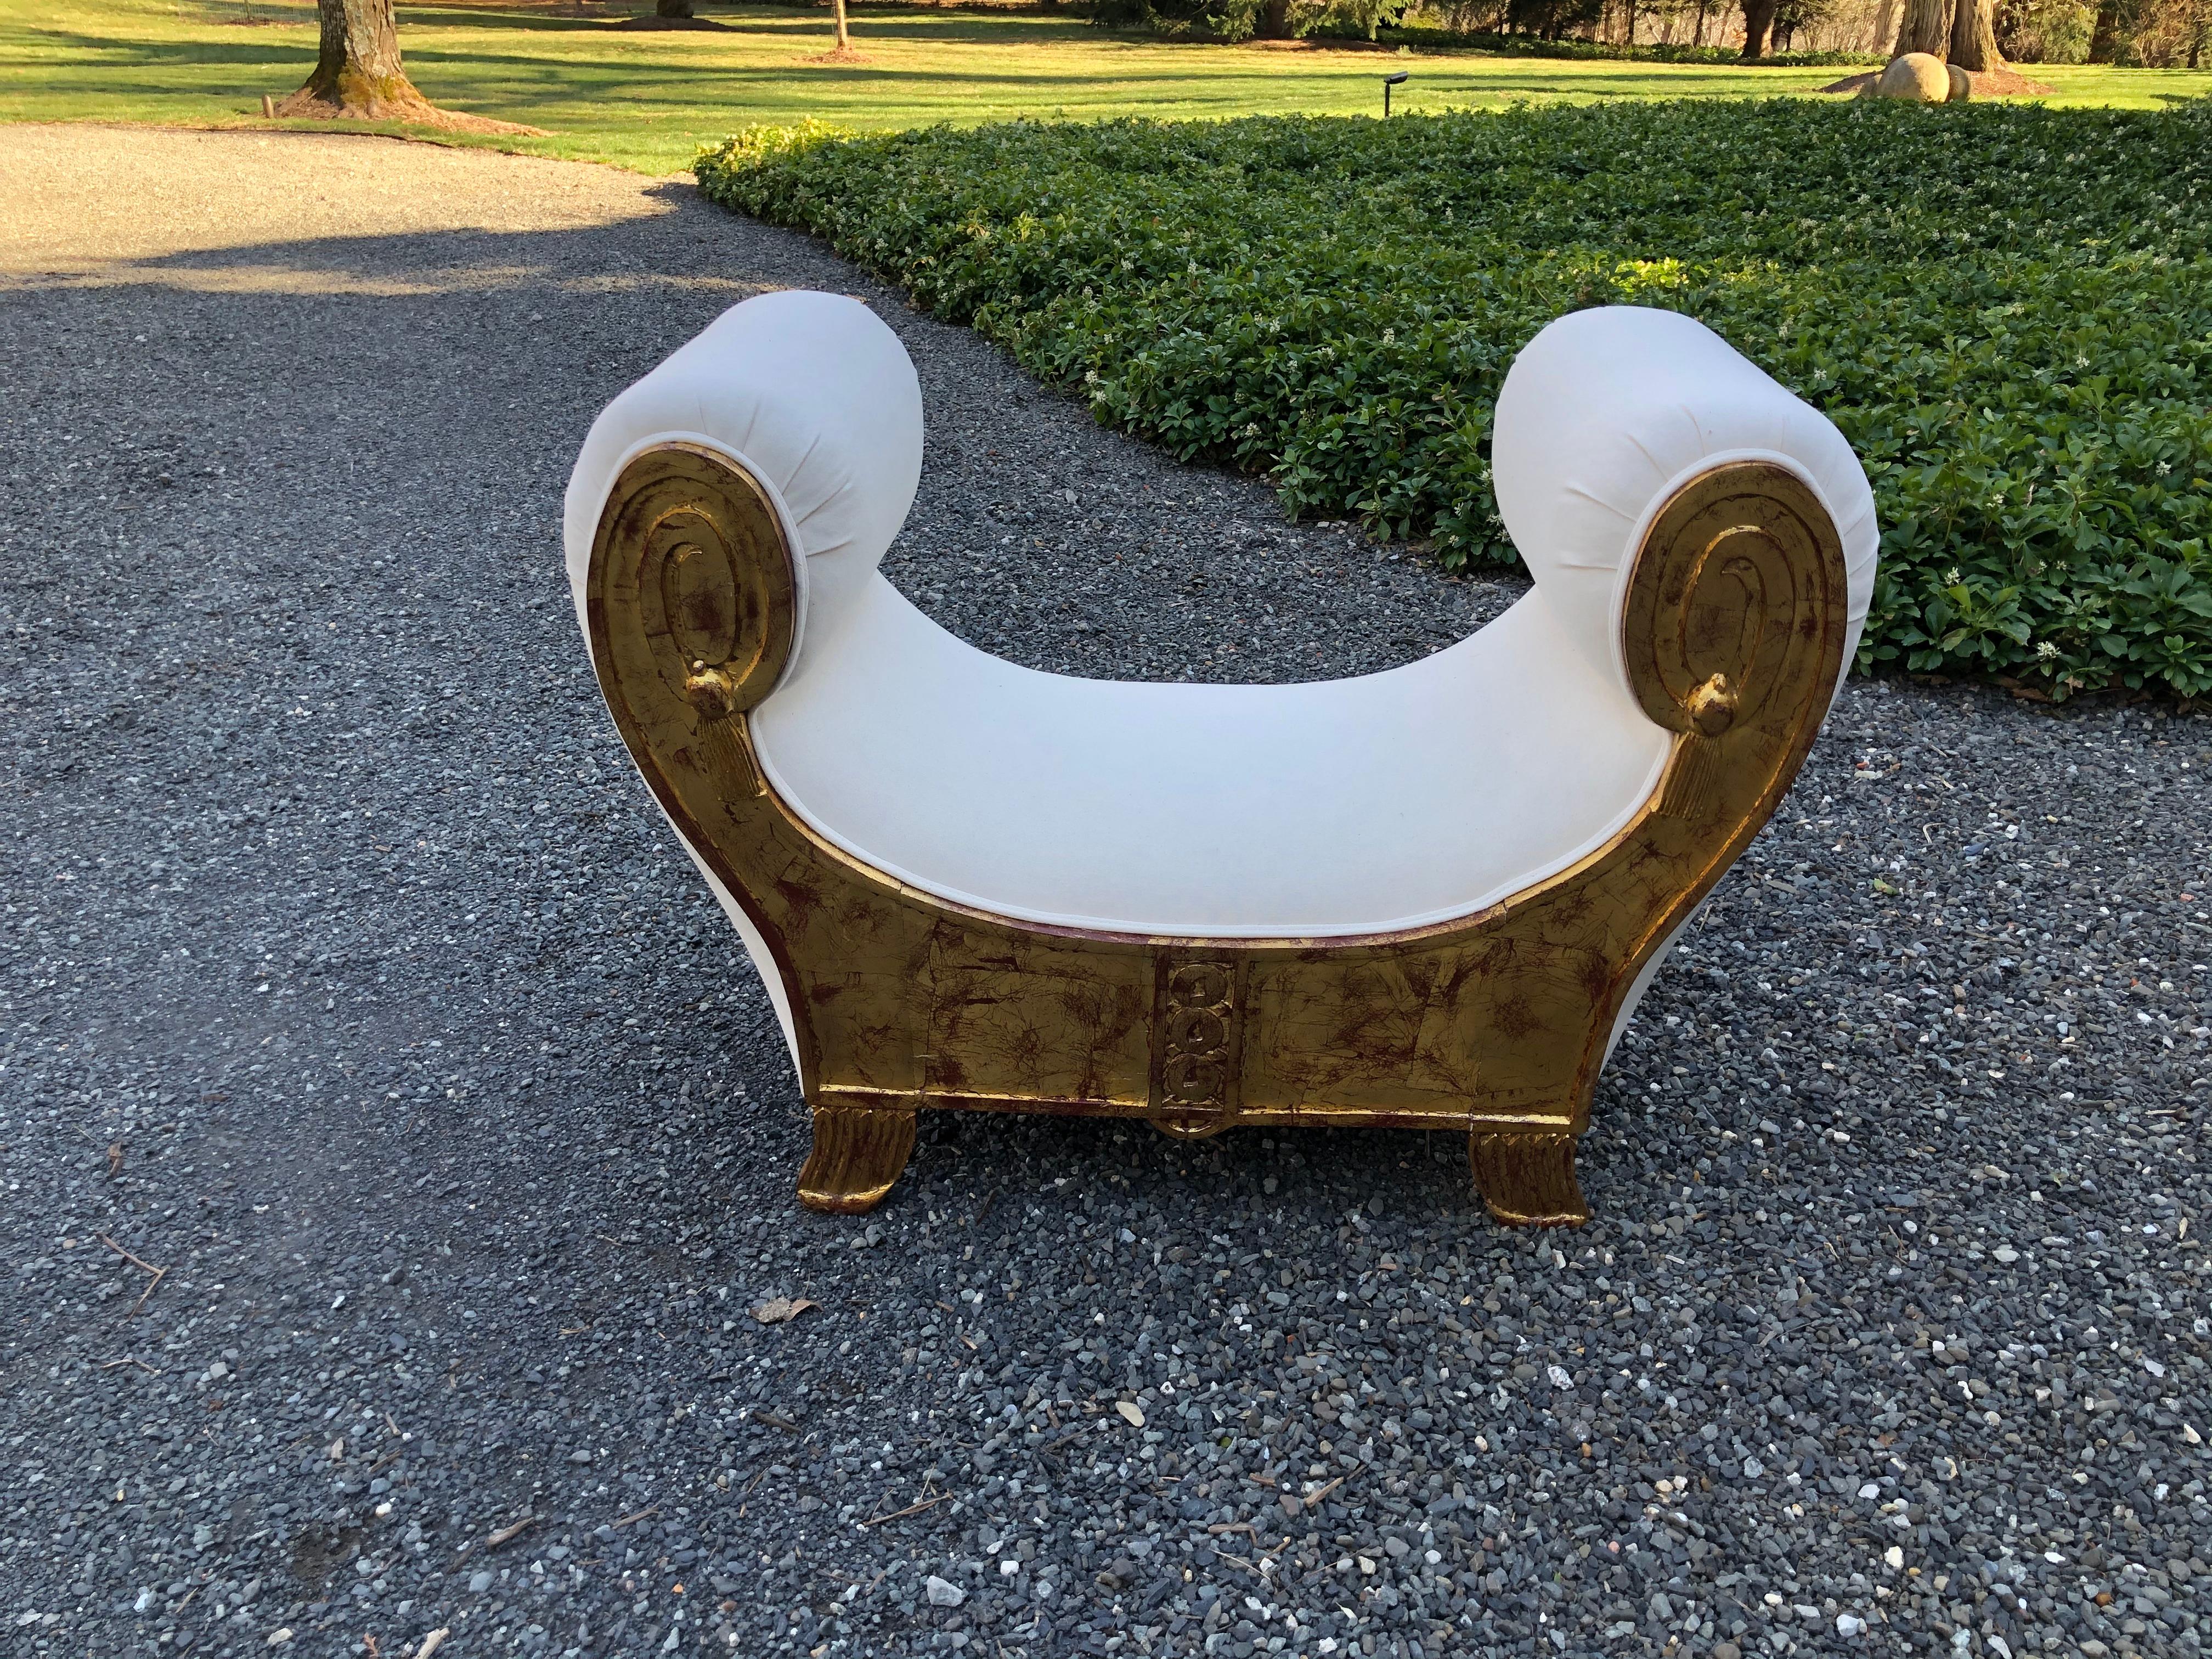 Elegant Egyptian Revival giltwood bench newly upholstered in crisp white cotton duck. The bench has beautiful patina with touches of red showing through the gold leaf and carved decoration on the feet, apron and arms.
 